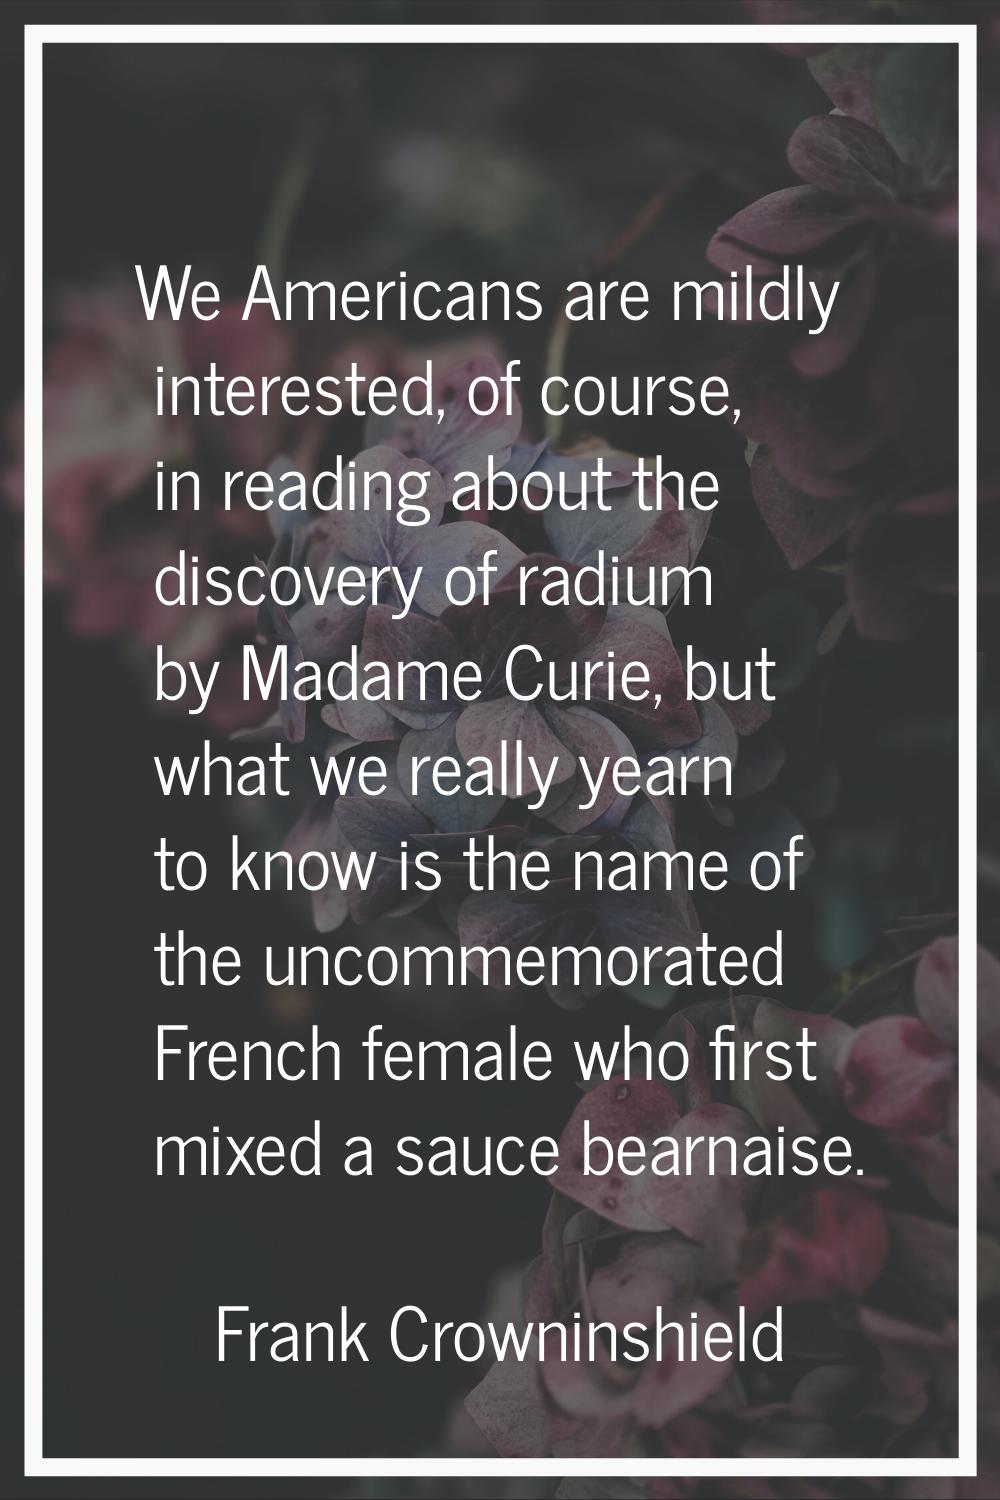 We Americans are mildly interested, of course, in reading about the discovery of radium by Madame C